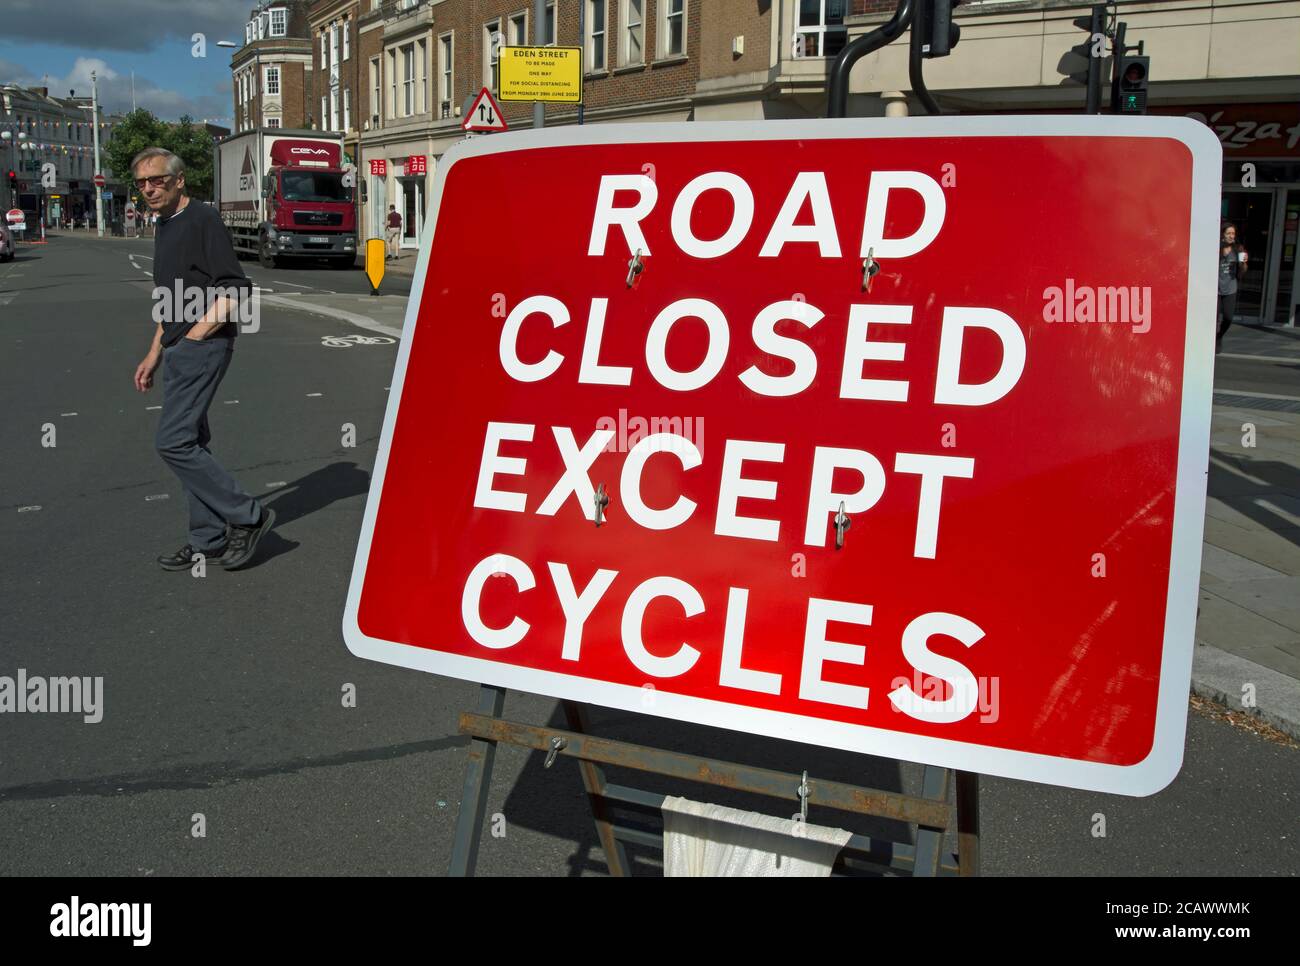 road sign in kingston upon thames, surrey, england, stating road closed except cycles Stock Photo